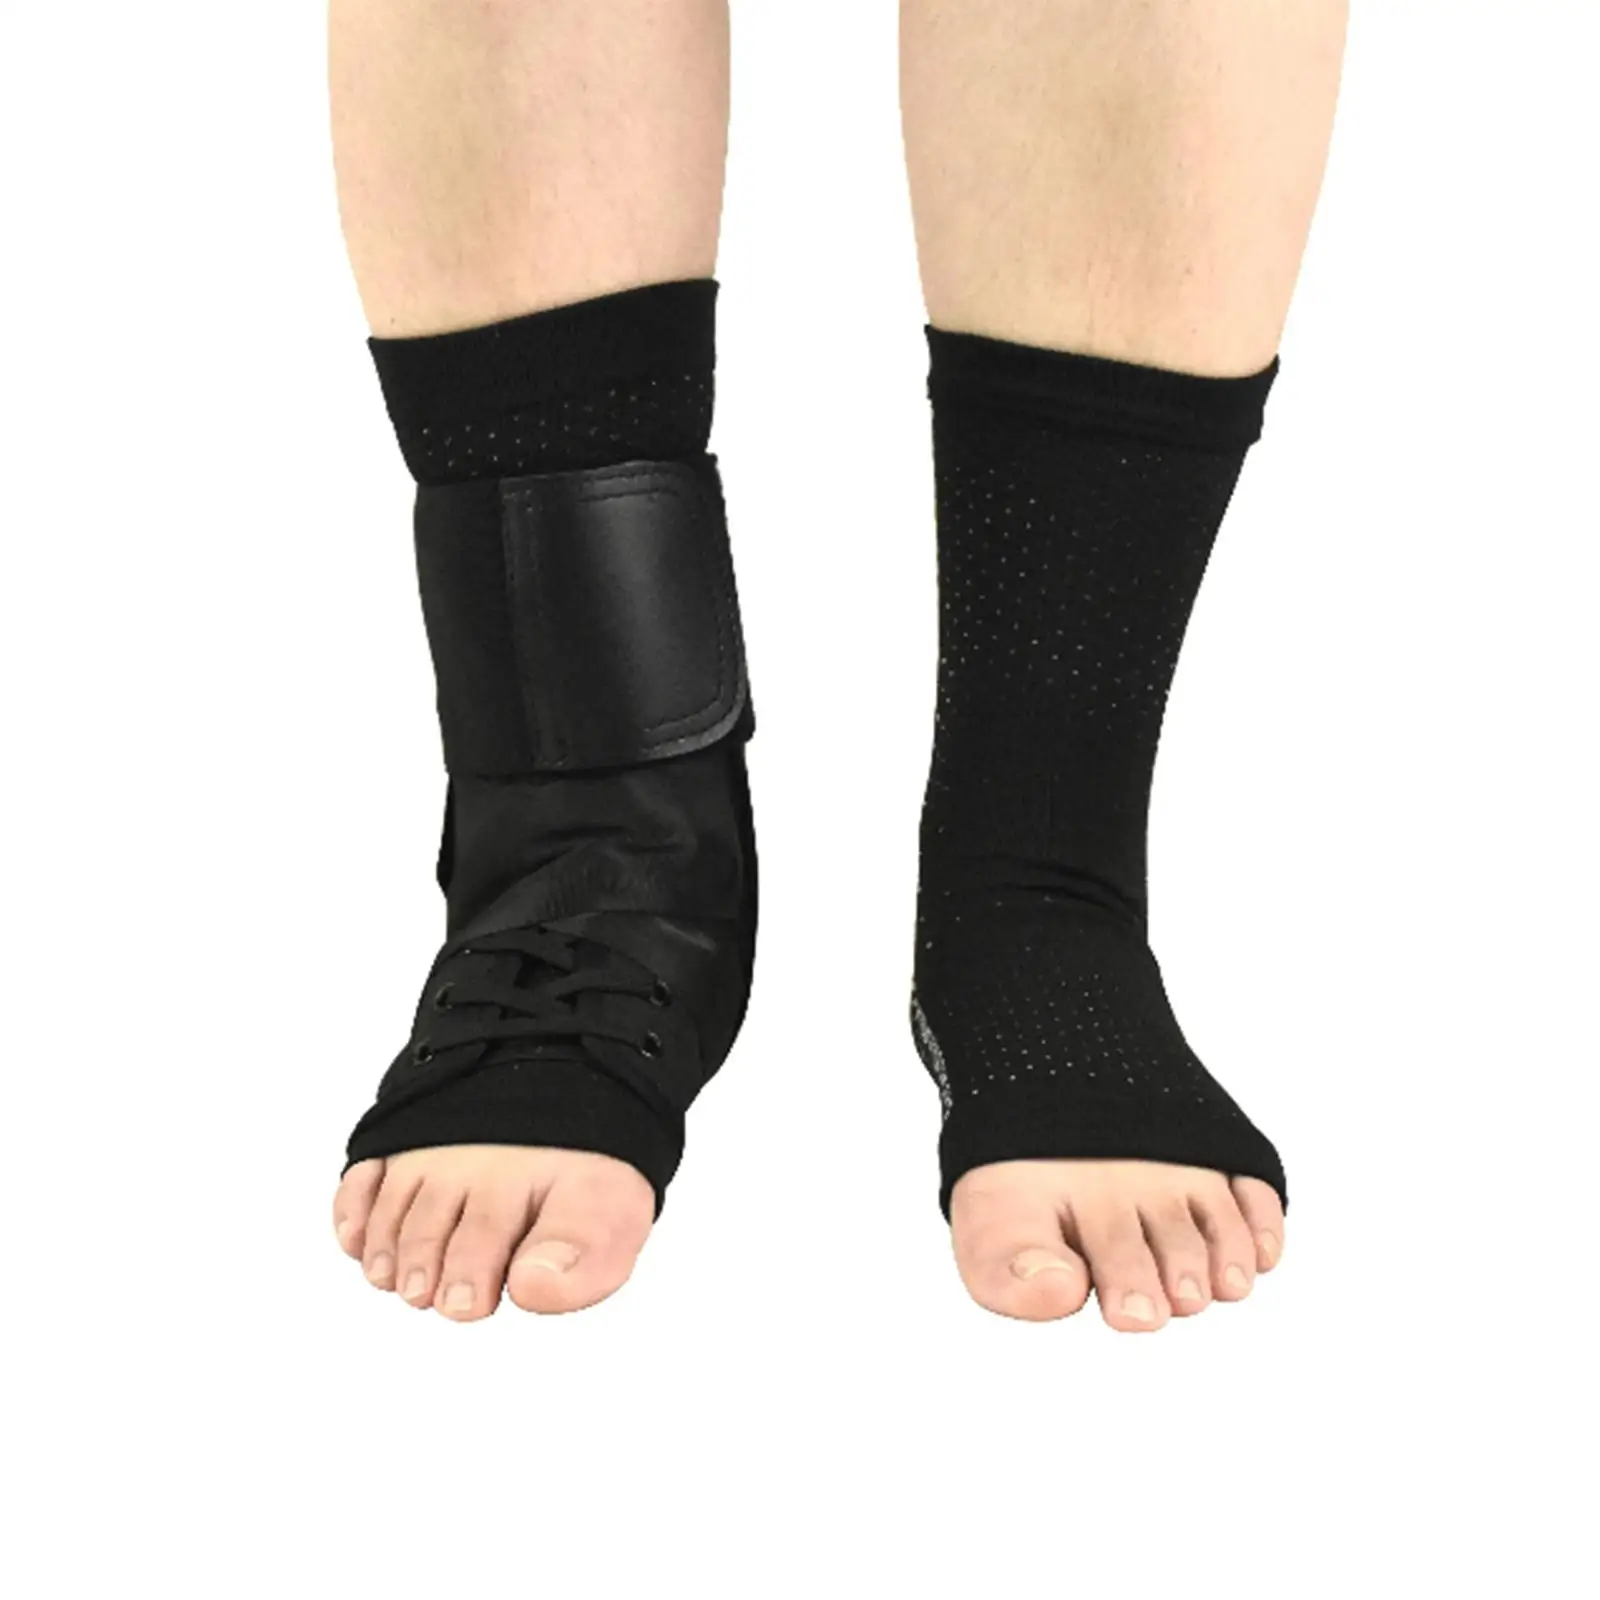 Ankle Support Brace Compression Socks Sleeve for Adults Pain Foot Heel Protection for Gym Competition Sports Riding Volleyball